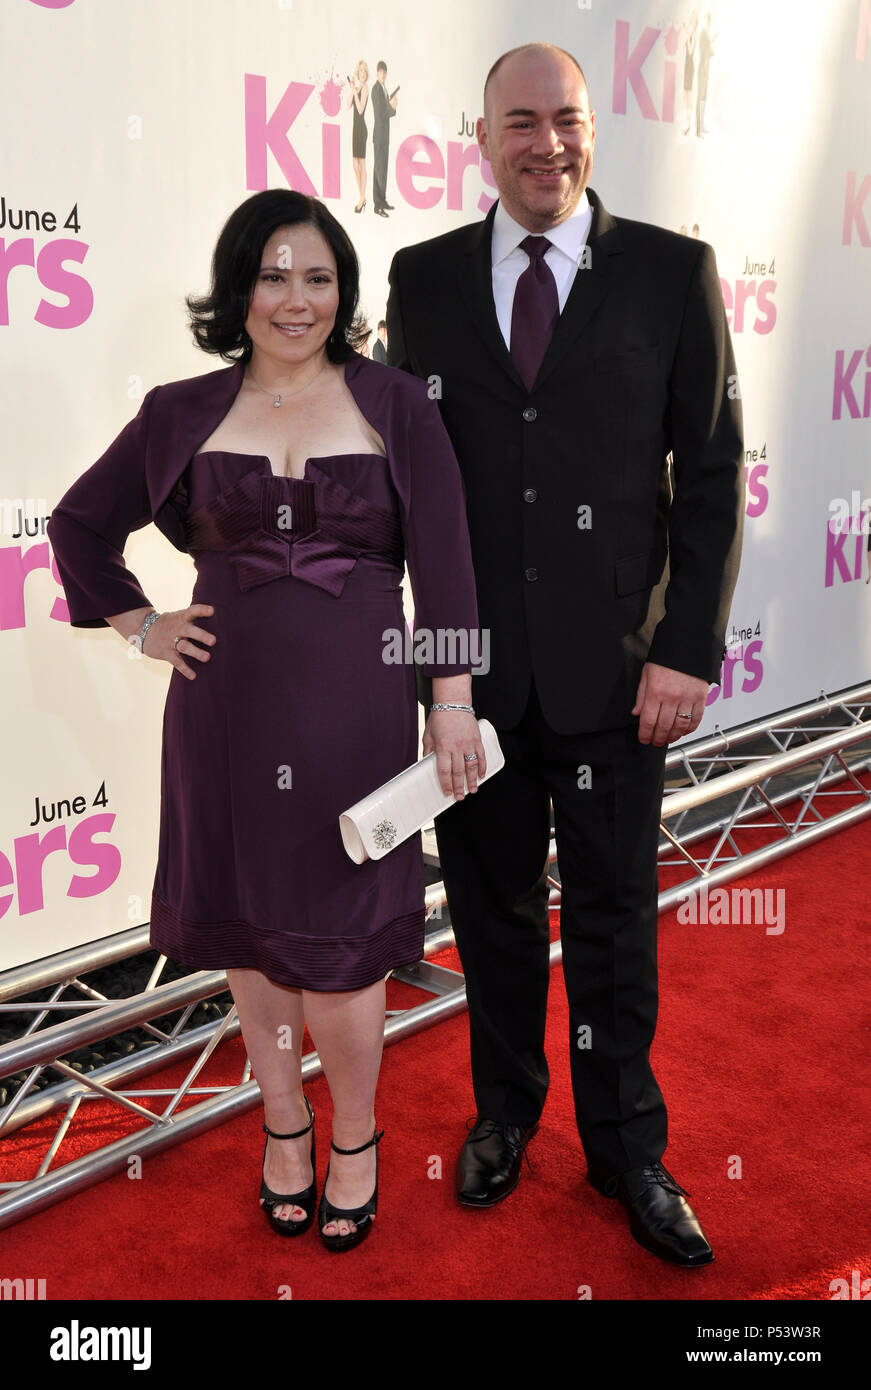 Alex Borstein & husband   - 'The Killers' Premiere at the Arclight Theatre in Los Angeles.Alex Borstein & husband  47  Event in Hollywood Life - California, Red Carpet Event, USA, Film Industry, Celebrities, Photography, Bestof, Arts Culture and Entertainment, Celebrities fashion, Best of, Hollywood Life, Event in Hollywood Life - California, Red Carpet and backstage, Music celebrities, Topix, Couple, family ( husband and wife ) and kids- Children, brothers and sisters inquiry tsuni@Gamma-USA.com, Credit Tsuni / USA, 2010 Stock Photo